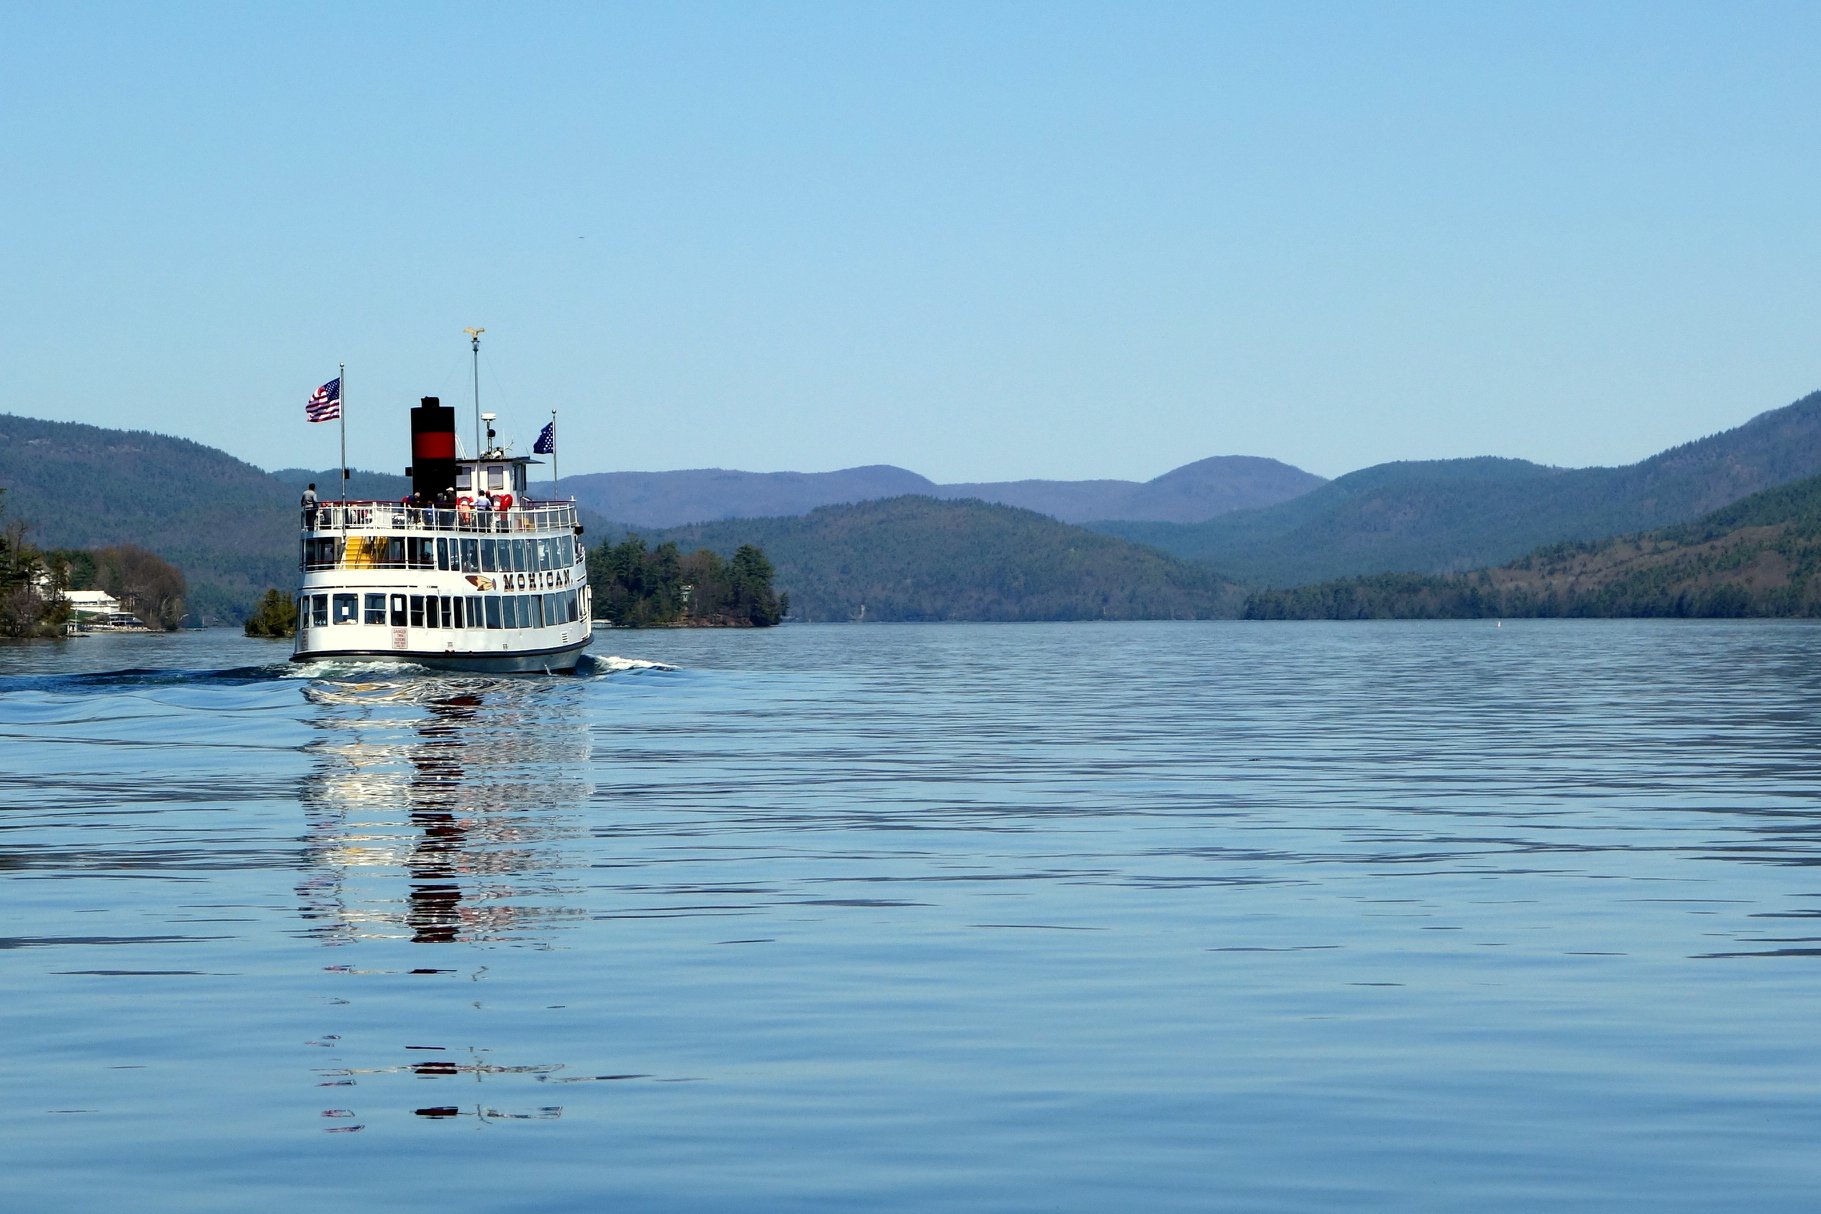 A long distance shot of the Mohican as she travels northward on the lake